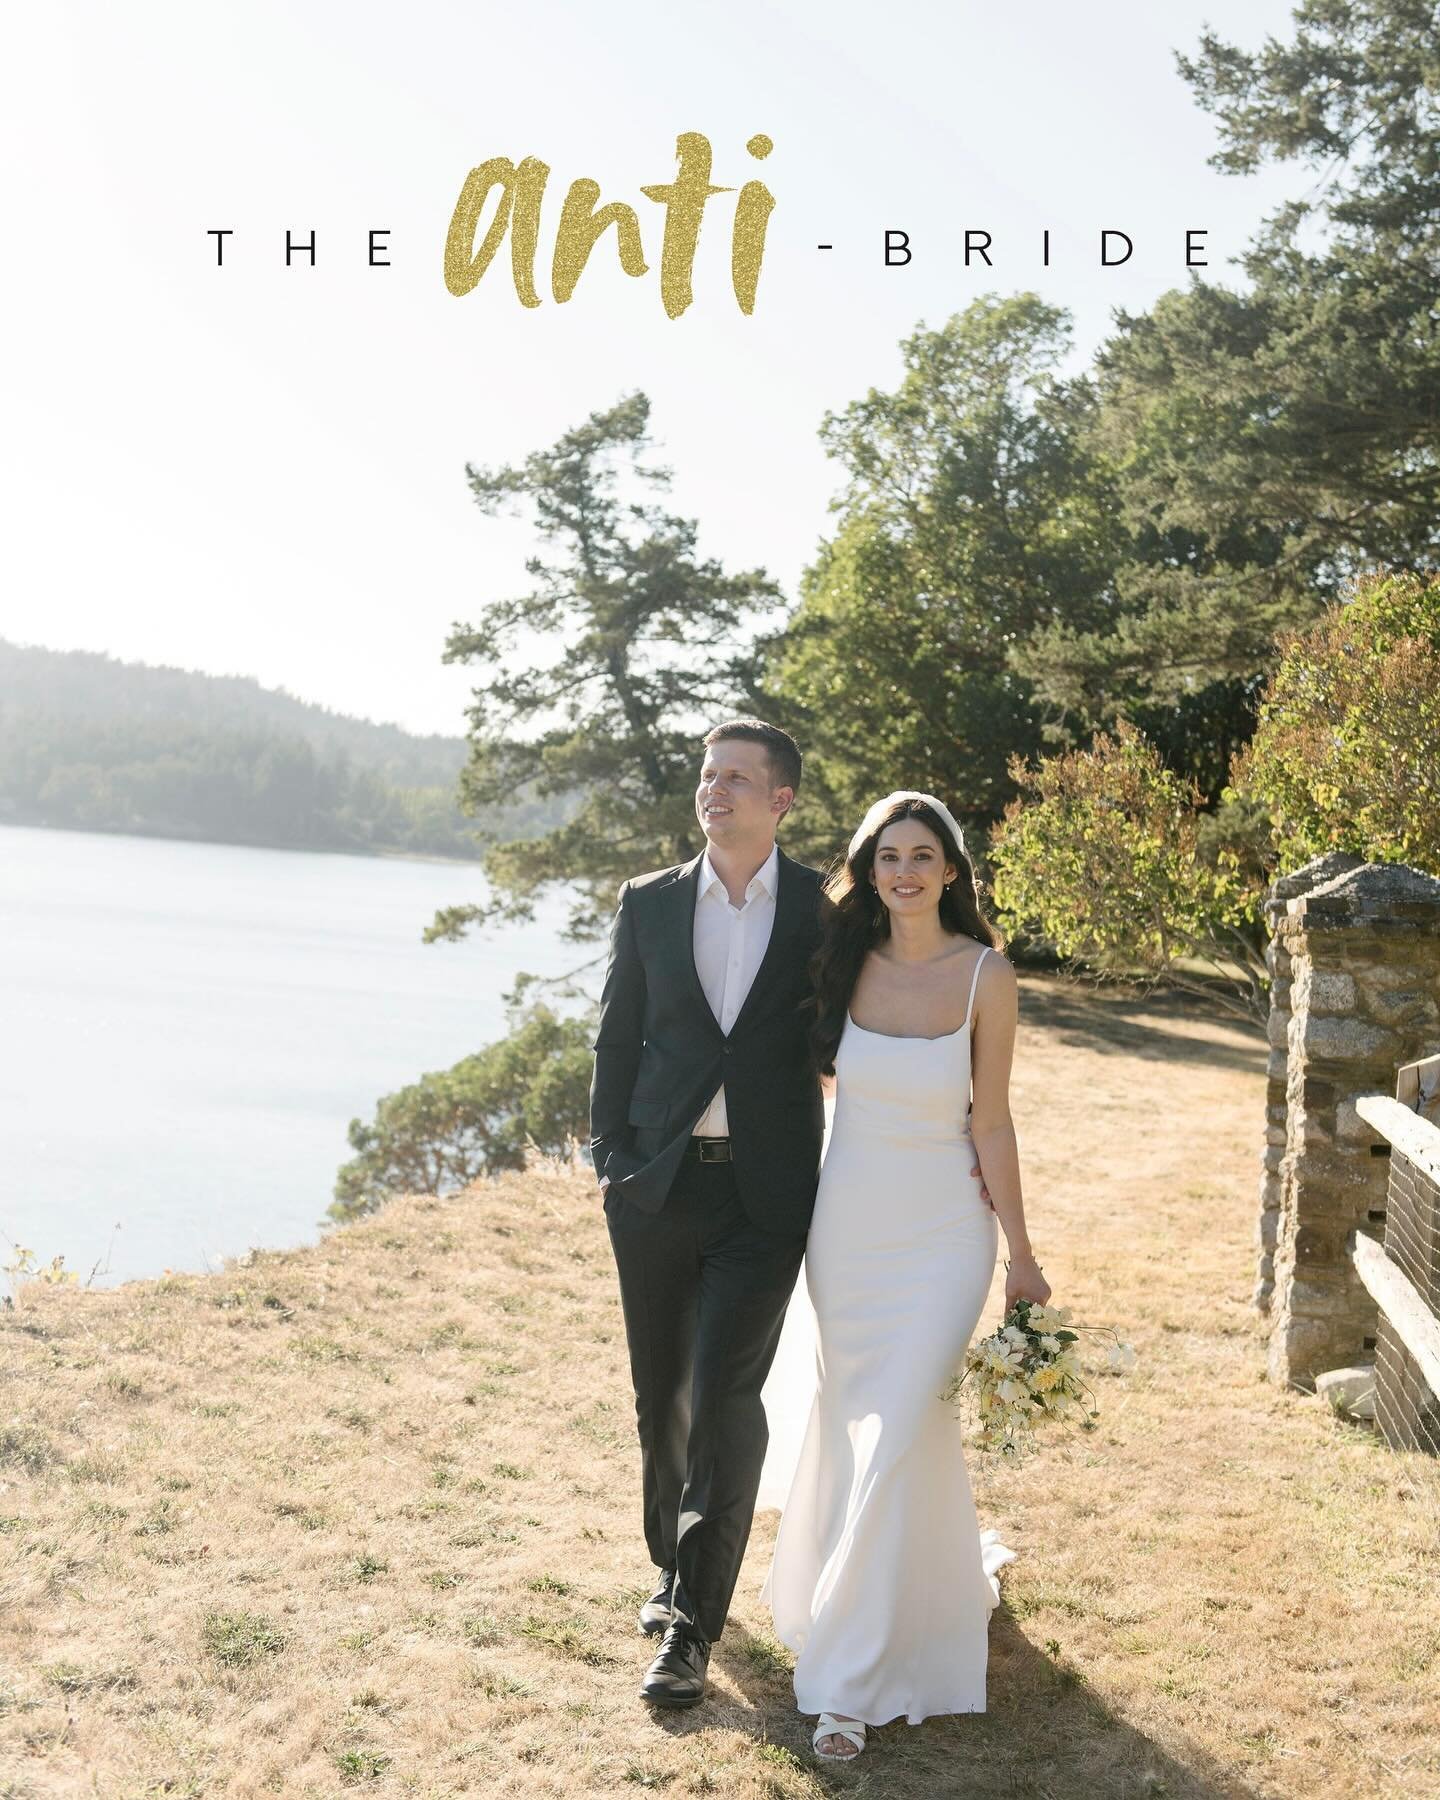 We are so excited to share that Melissa and Steven&rsquo;s micro wedding day on Orcas Island has been featured on @_anti_bride! 

Their wedding day was pure magic. From a sunny ceremony on the cliffs overlooking the ocean with 25 guests, to the getaw